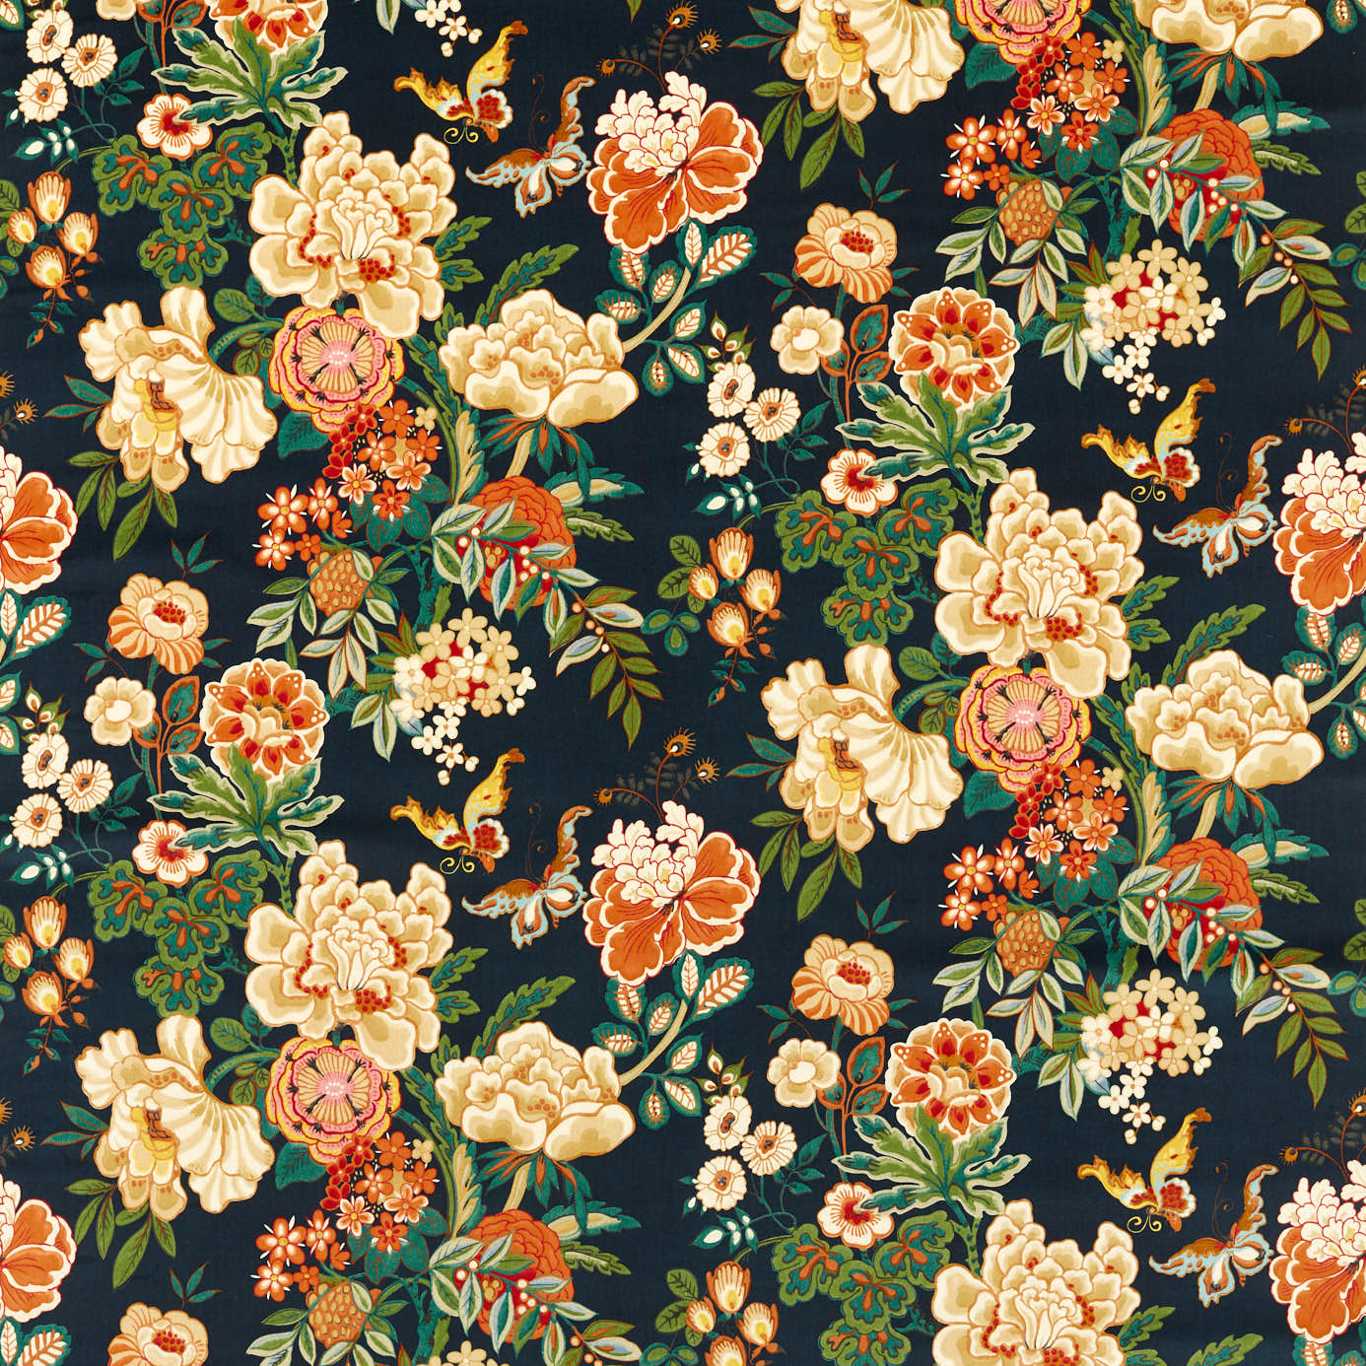 Emperor Peony Fabric by Sanderson - DWAT226961 - Midnight/Apricot